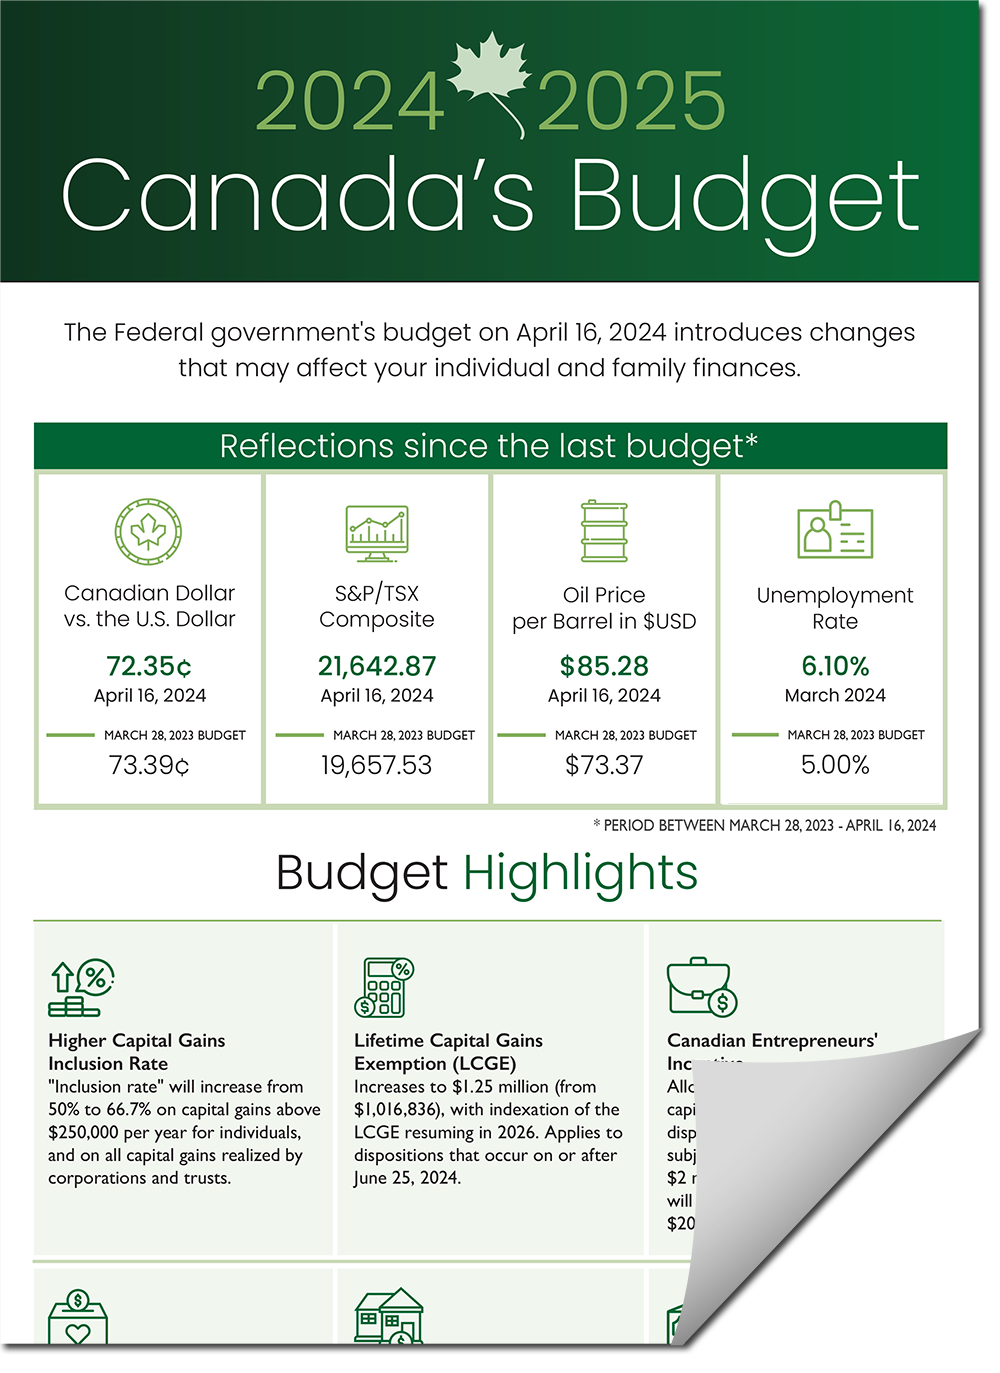 Canada's Budget Highlights 2024-2025 Infographic